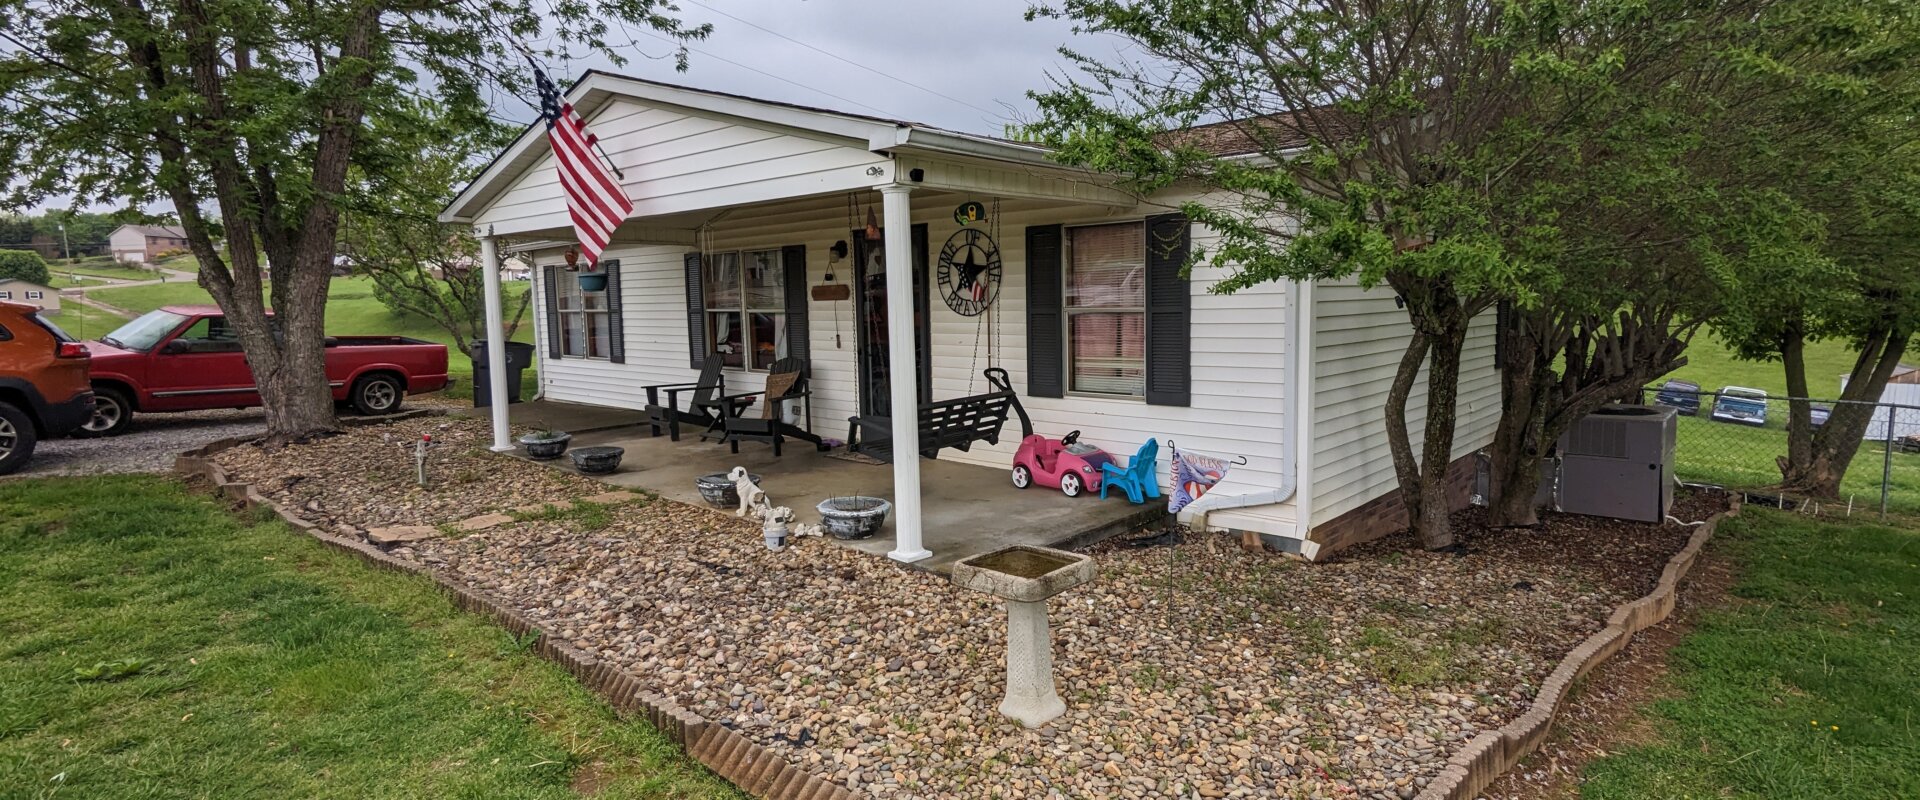 white doublewidemobile home located in morristown tennessee purchased by knoxville mobile home buyer